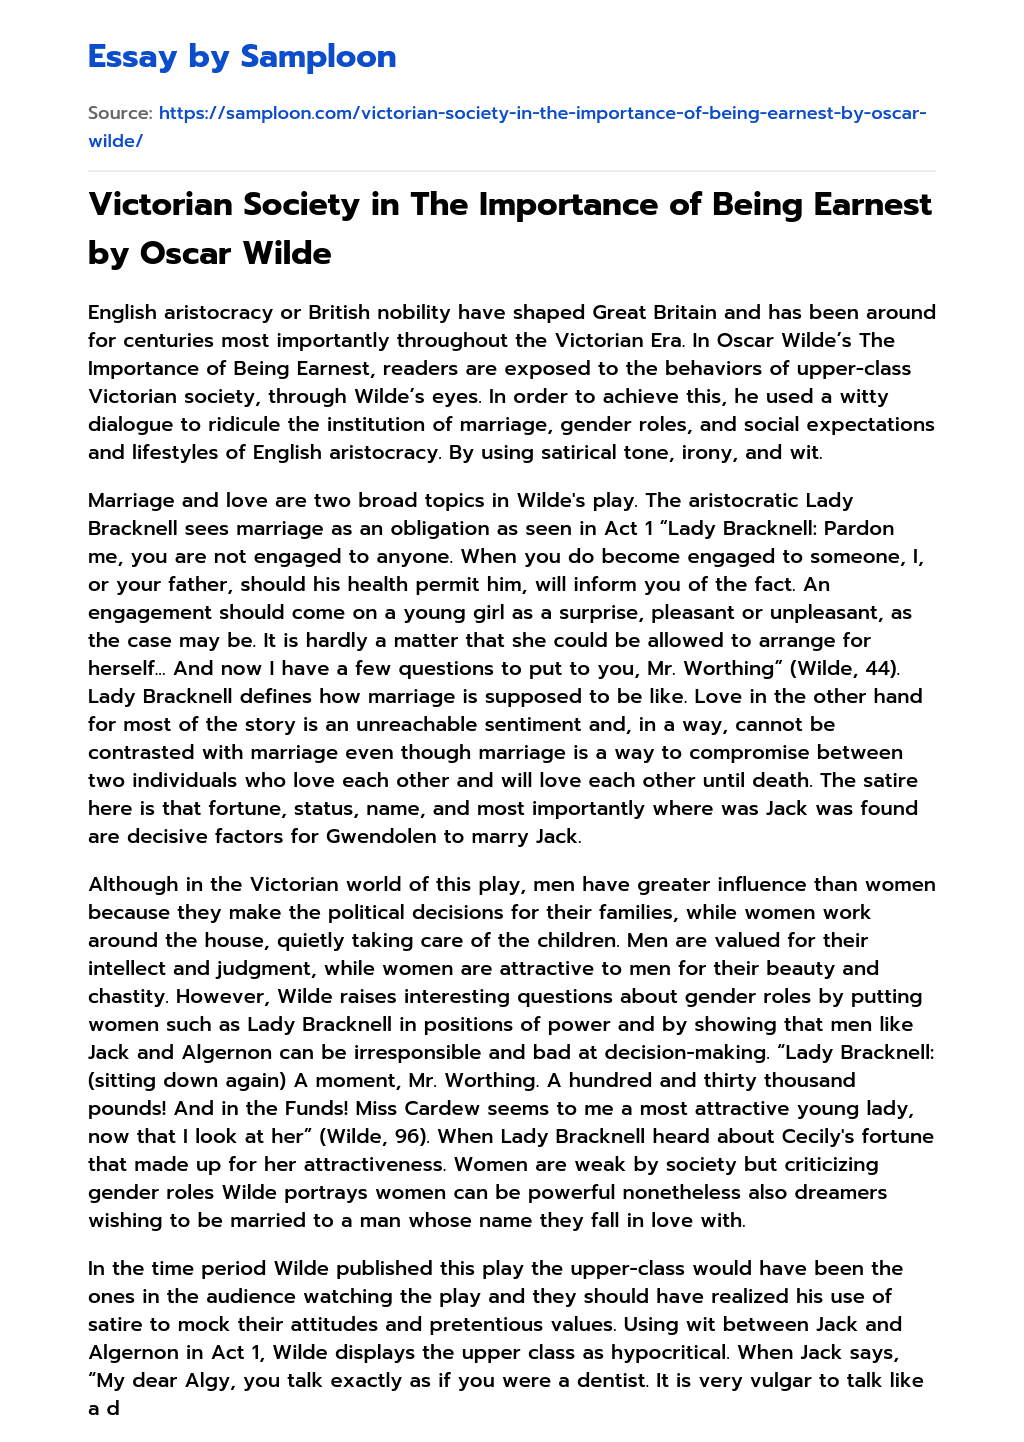 Victorian Society in The Importance of Being Earnest by Oscar Wilde essay